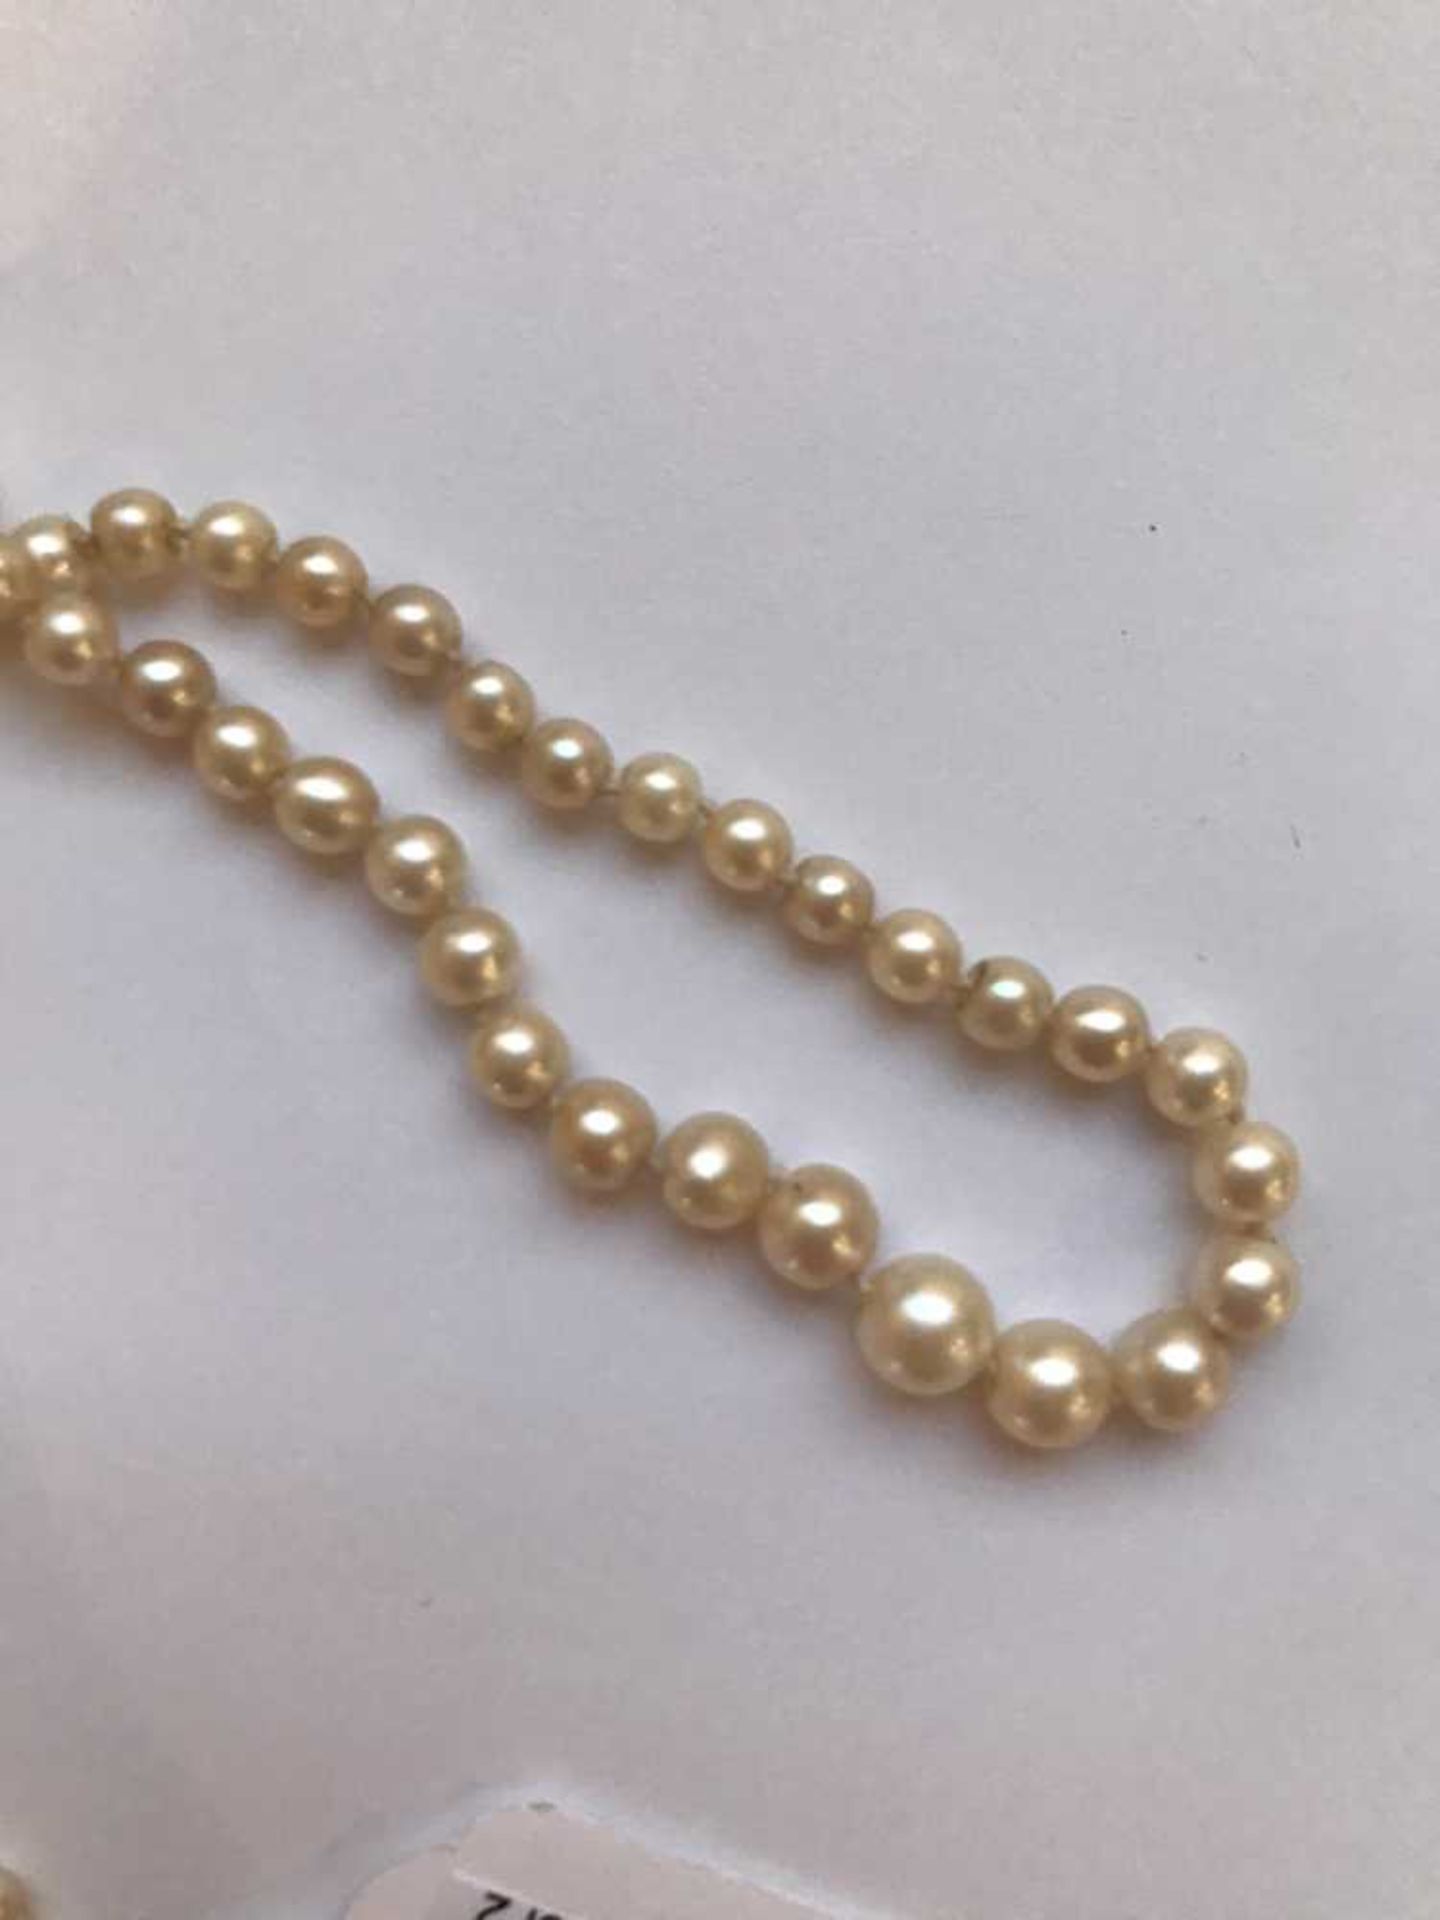 A natural saltwater pearl necklace - Image 6 of 6